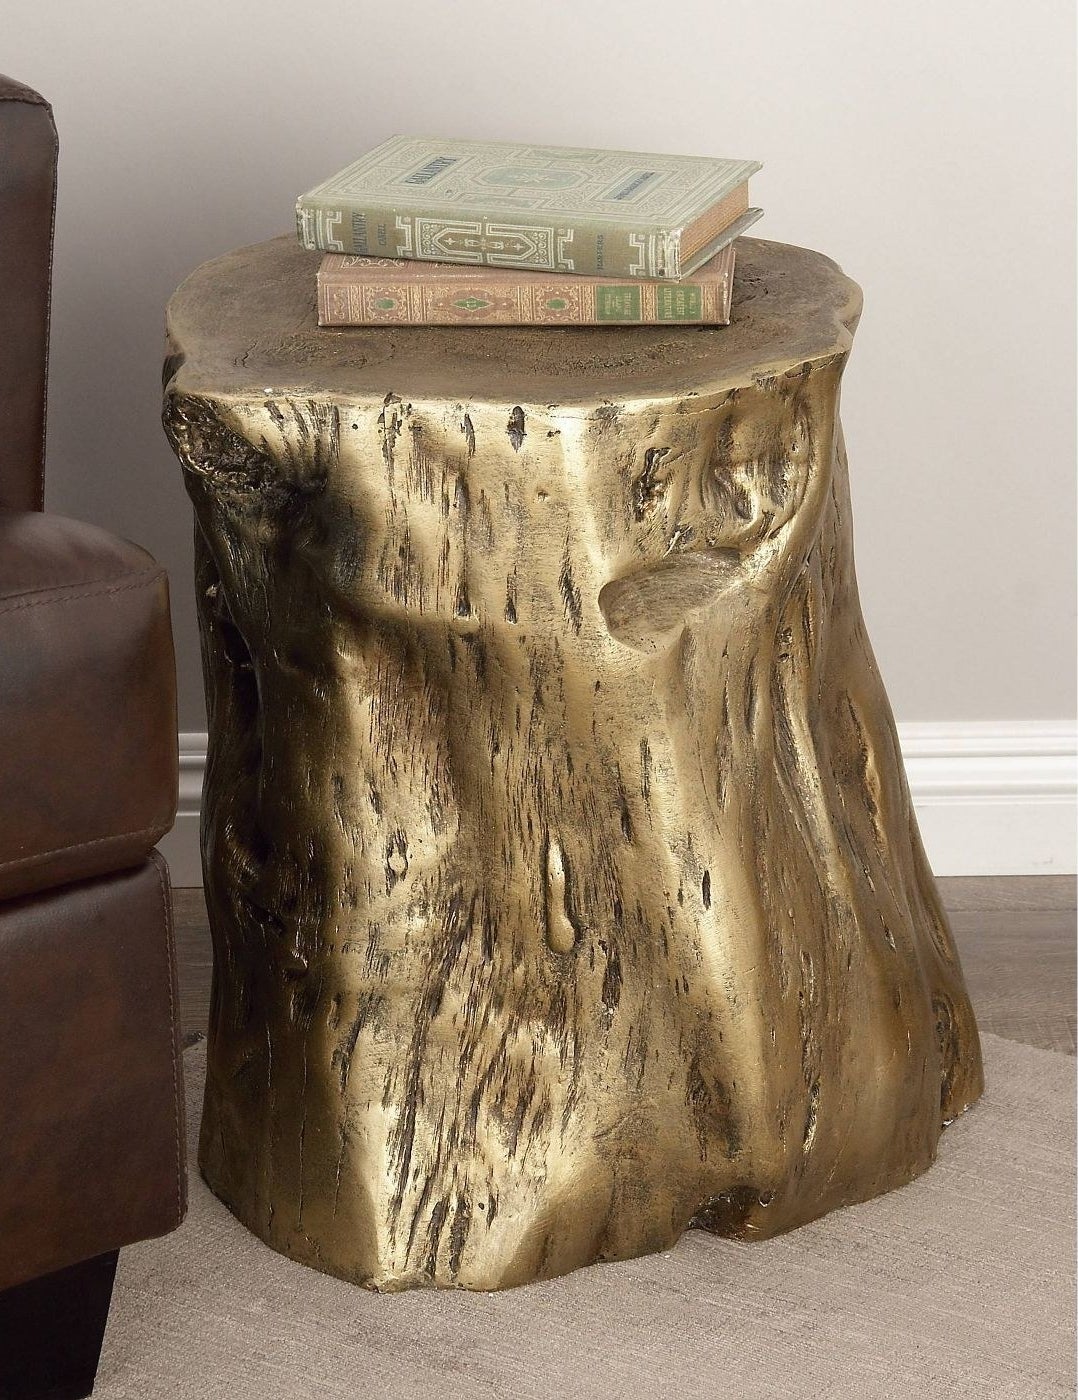 The gold-colored tree-trunk-looking side table with books on it